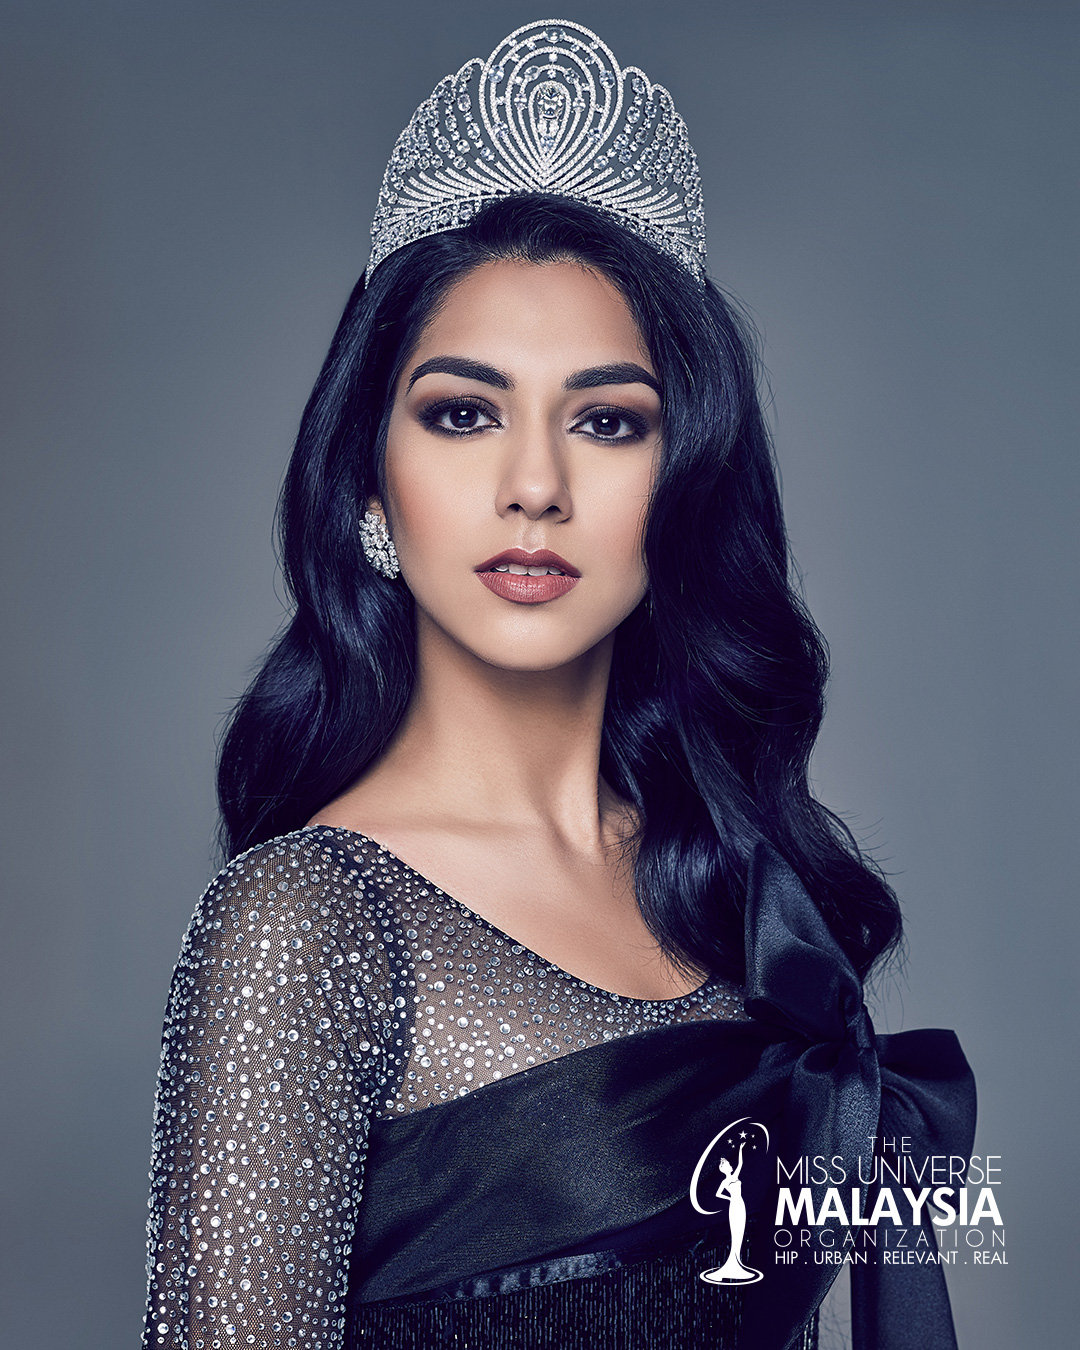 ARE YOU THE NEXT MISS UNIVERSE MALAYSIA 2020? Register Online and